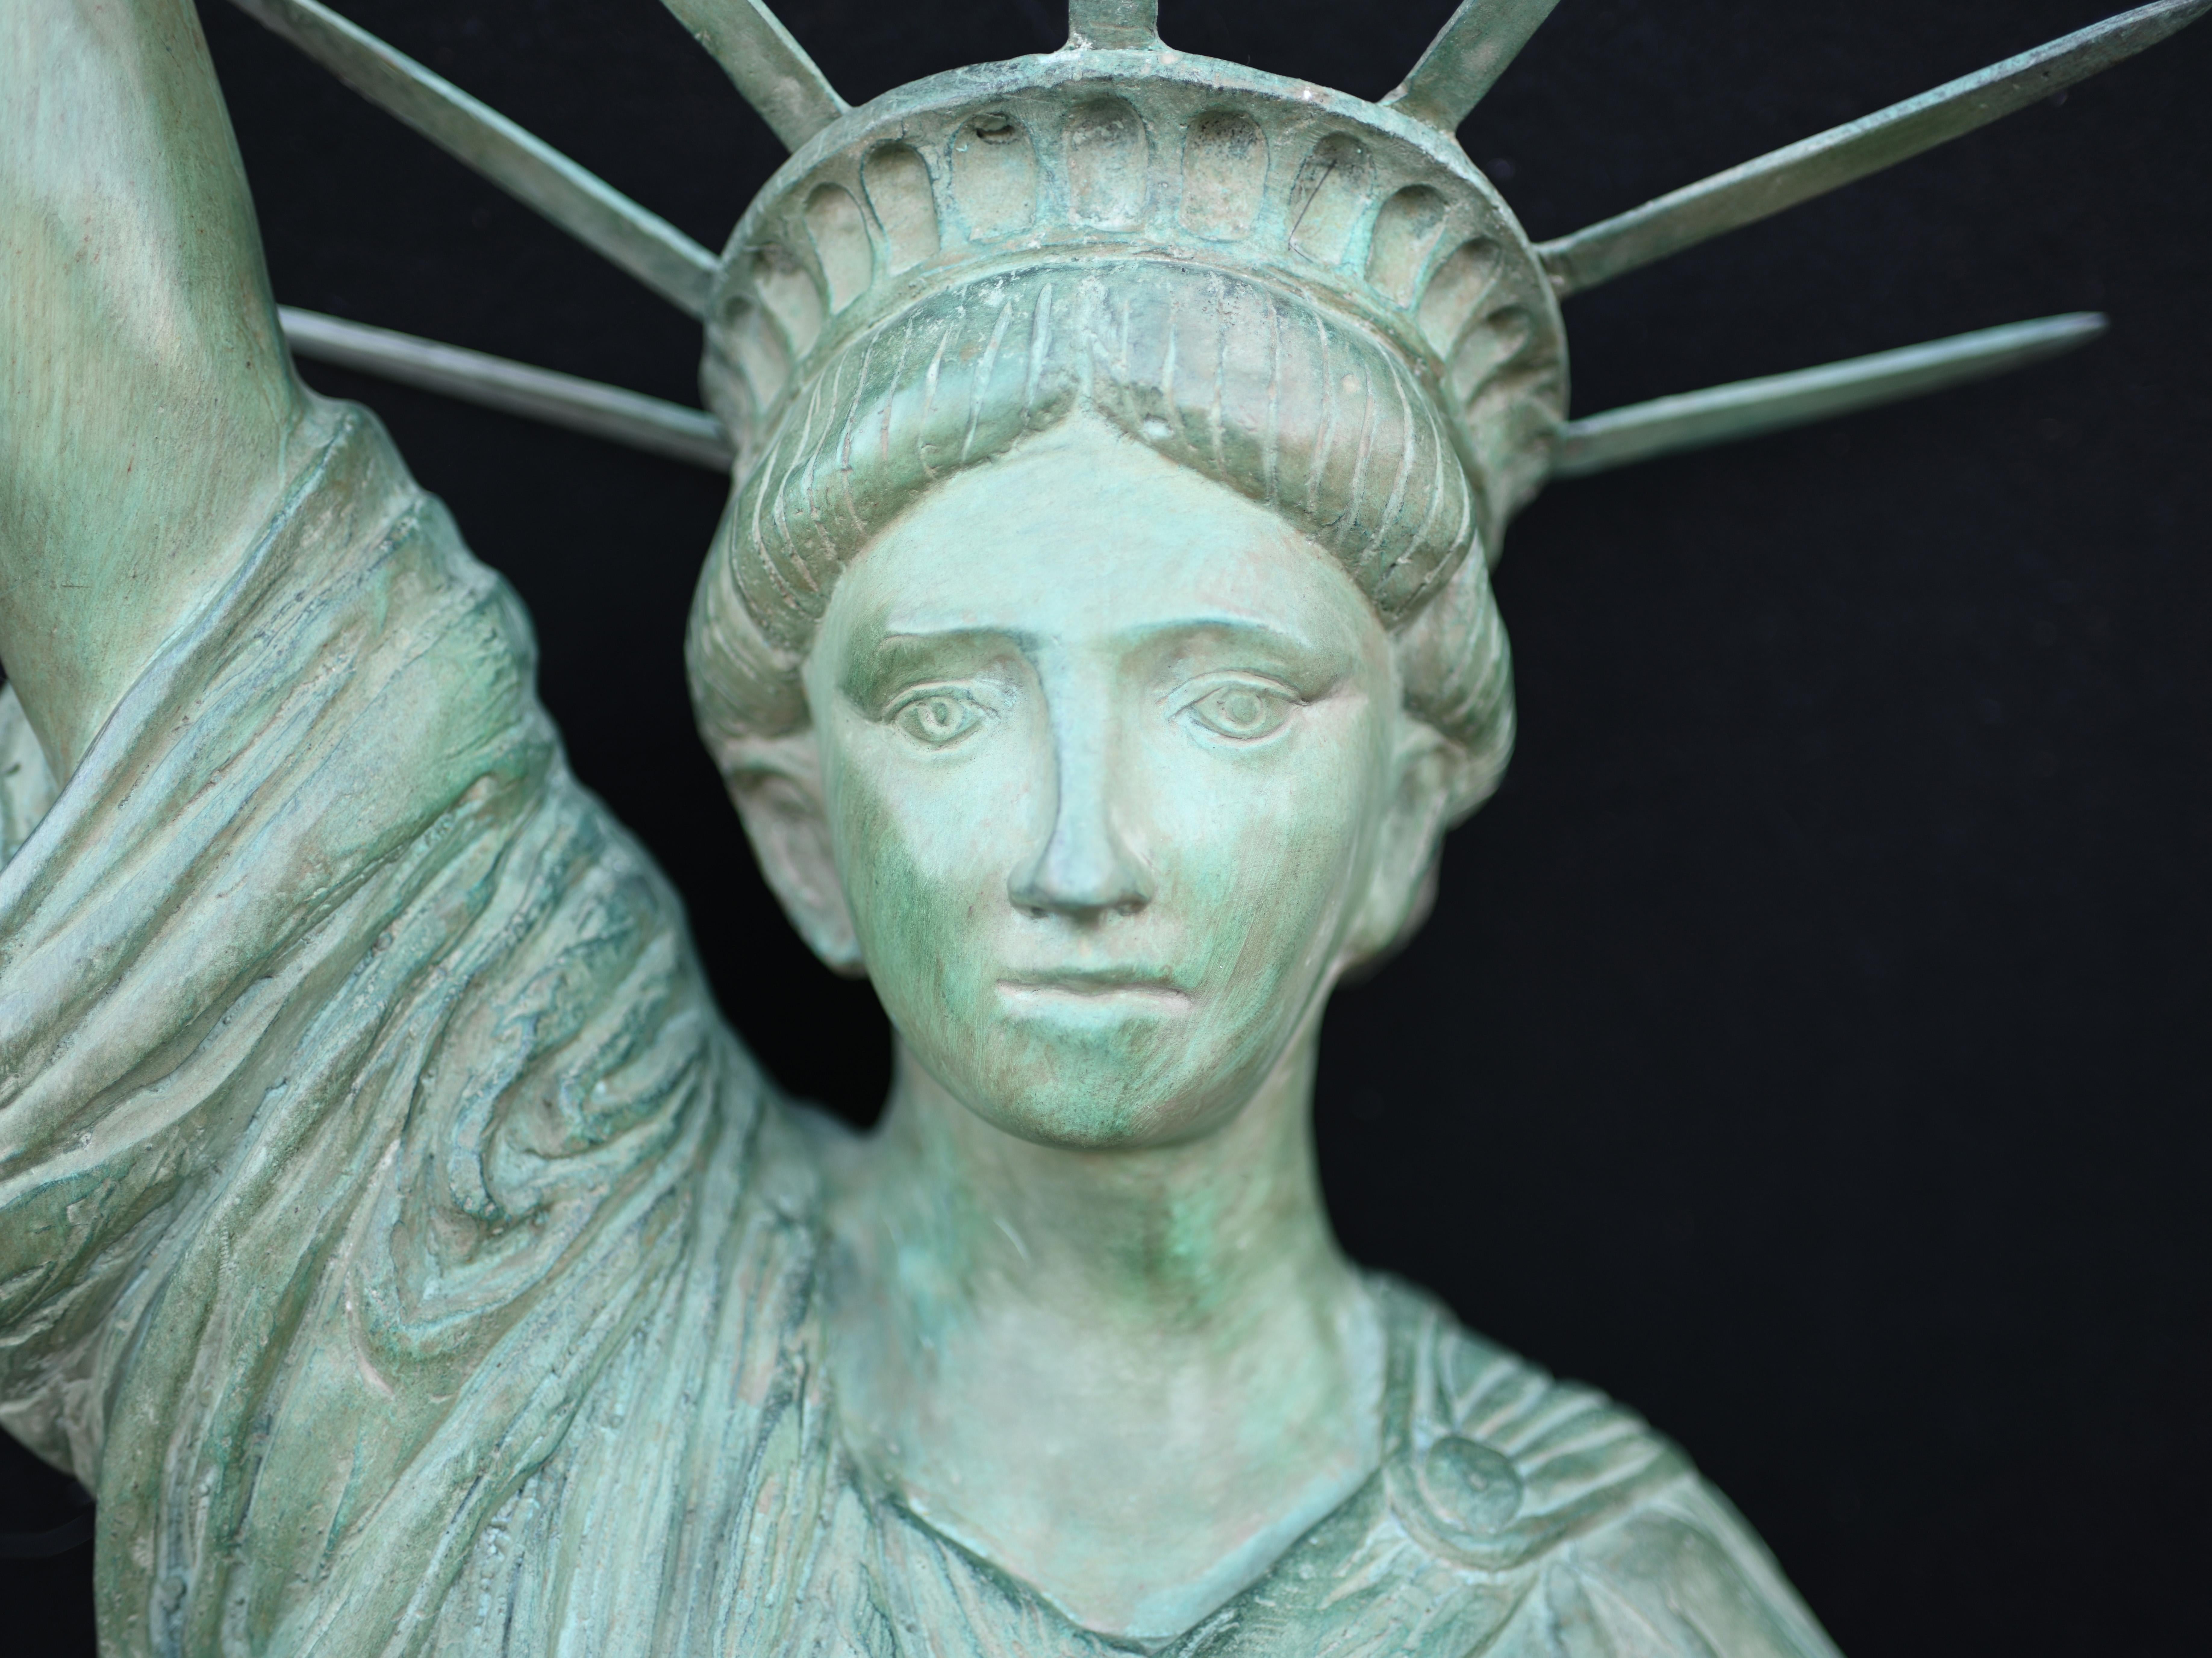 Wonderful bronze casting of the Statue of Liberty
One of the most famous statues which also functions as a light
Good size at over six feet tall - 200 cm
Love the verdis gris patina
This is pre-wired with a European plug, can be adapted for